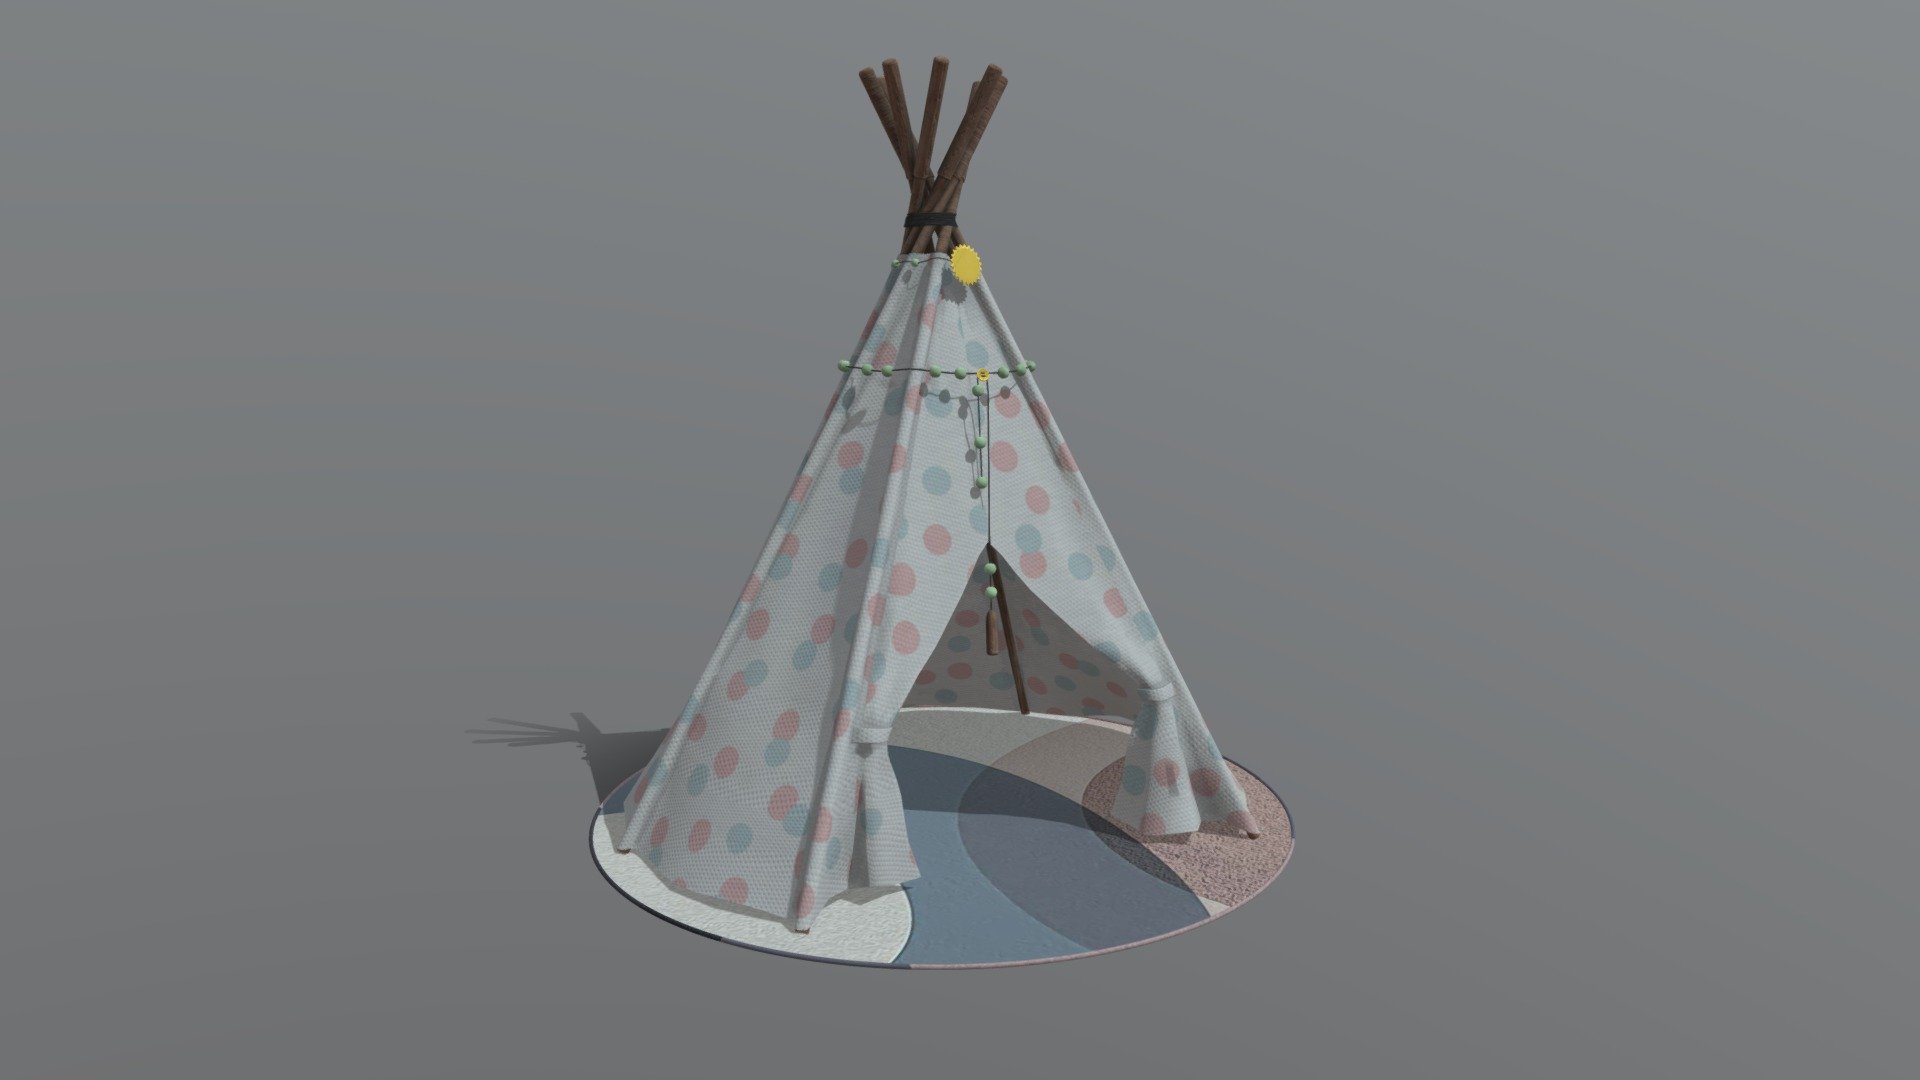 Tepee kids furniture Decoration for Kids Bedroom

18 K Polys Ready for engine like UE or Unity same for the principal renderer softwares.

2 channels of UVs for lightmap Baking Substance 3D Painter File for you to customize PBR Material Metallic / Roughness

If you need something, its a pleasure to help! Thanks for your purchase 3d model